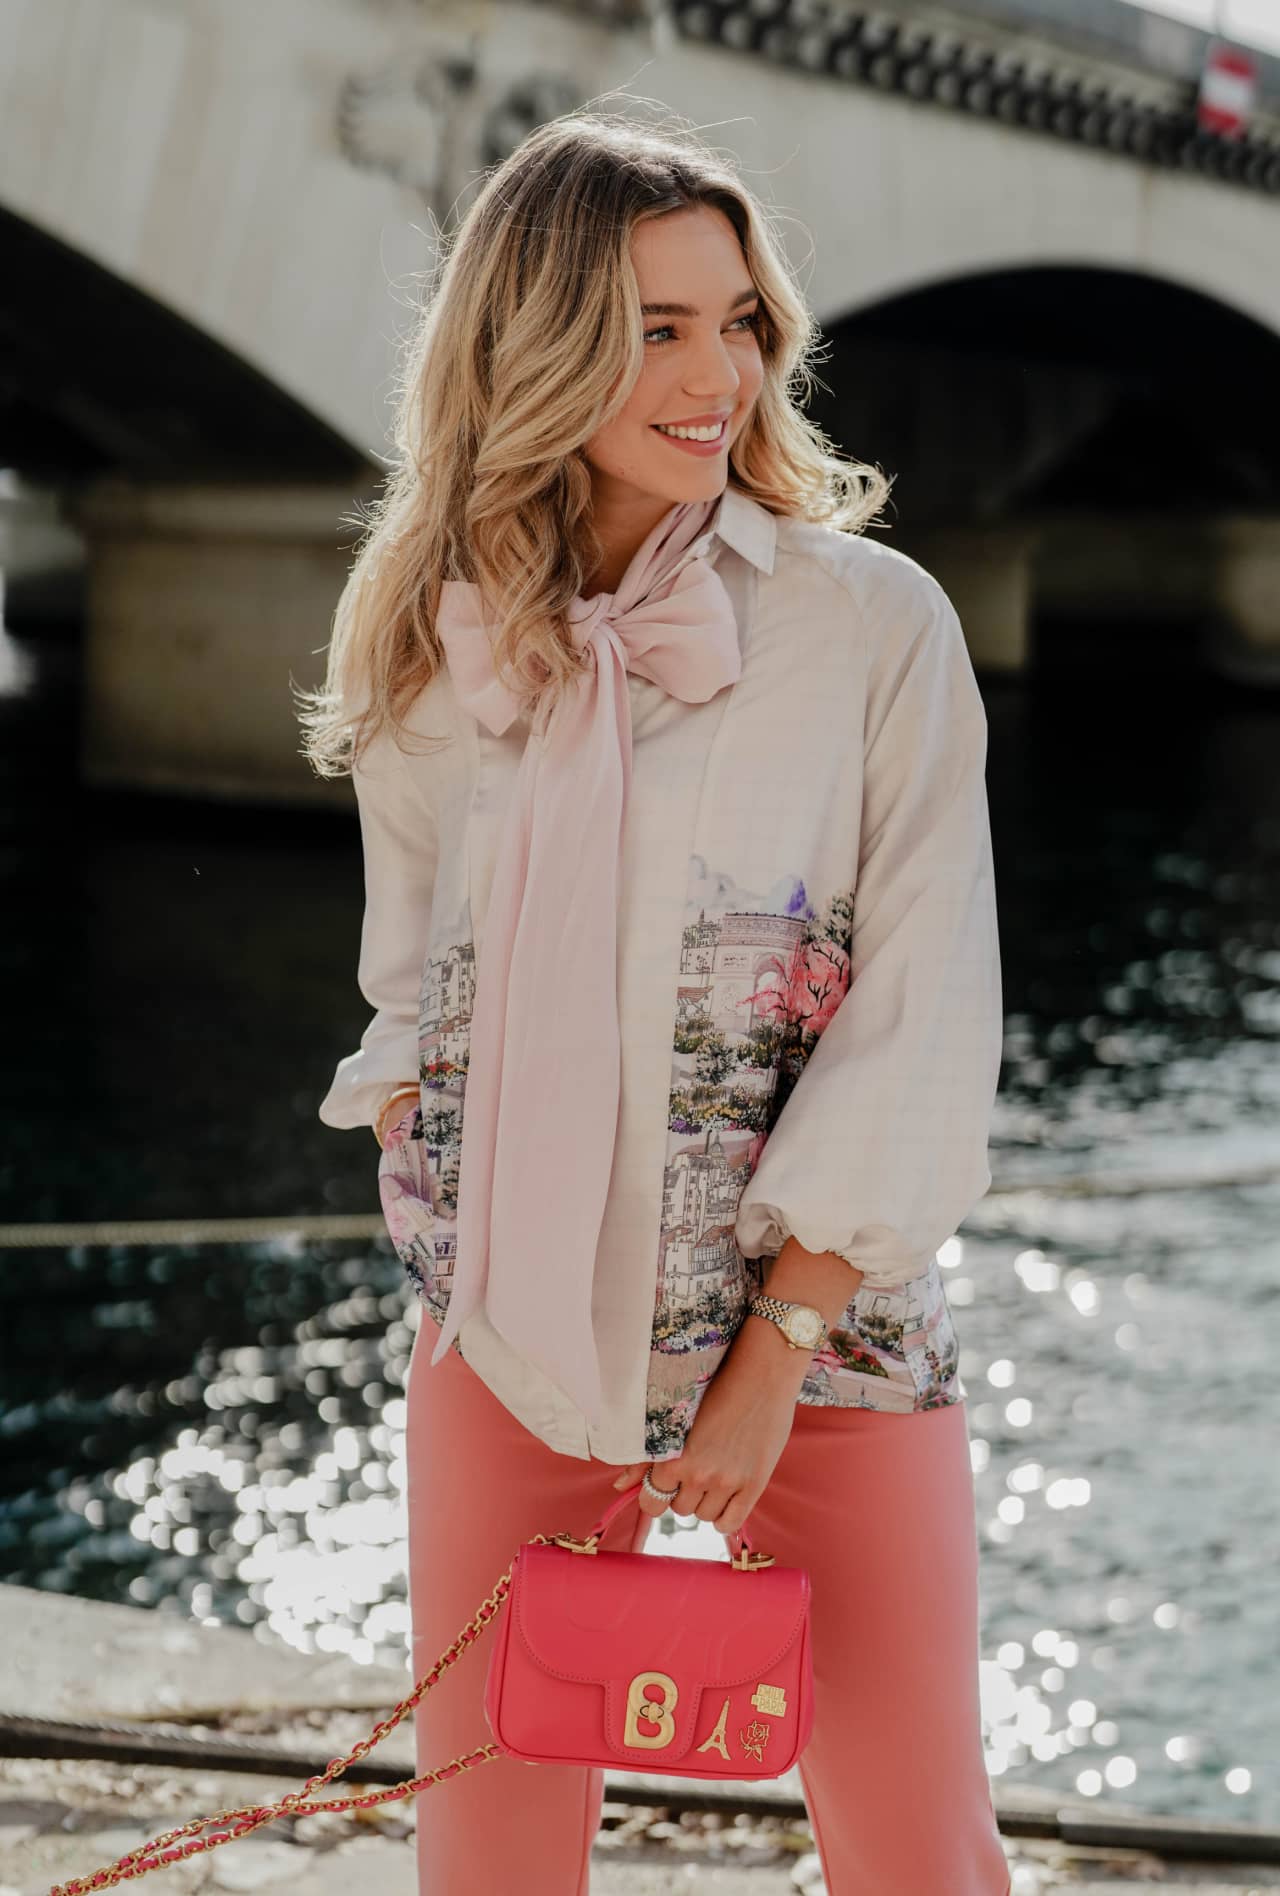 An Unexpected Way to Style a Floral Blouse